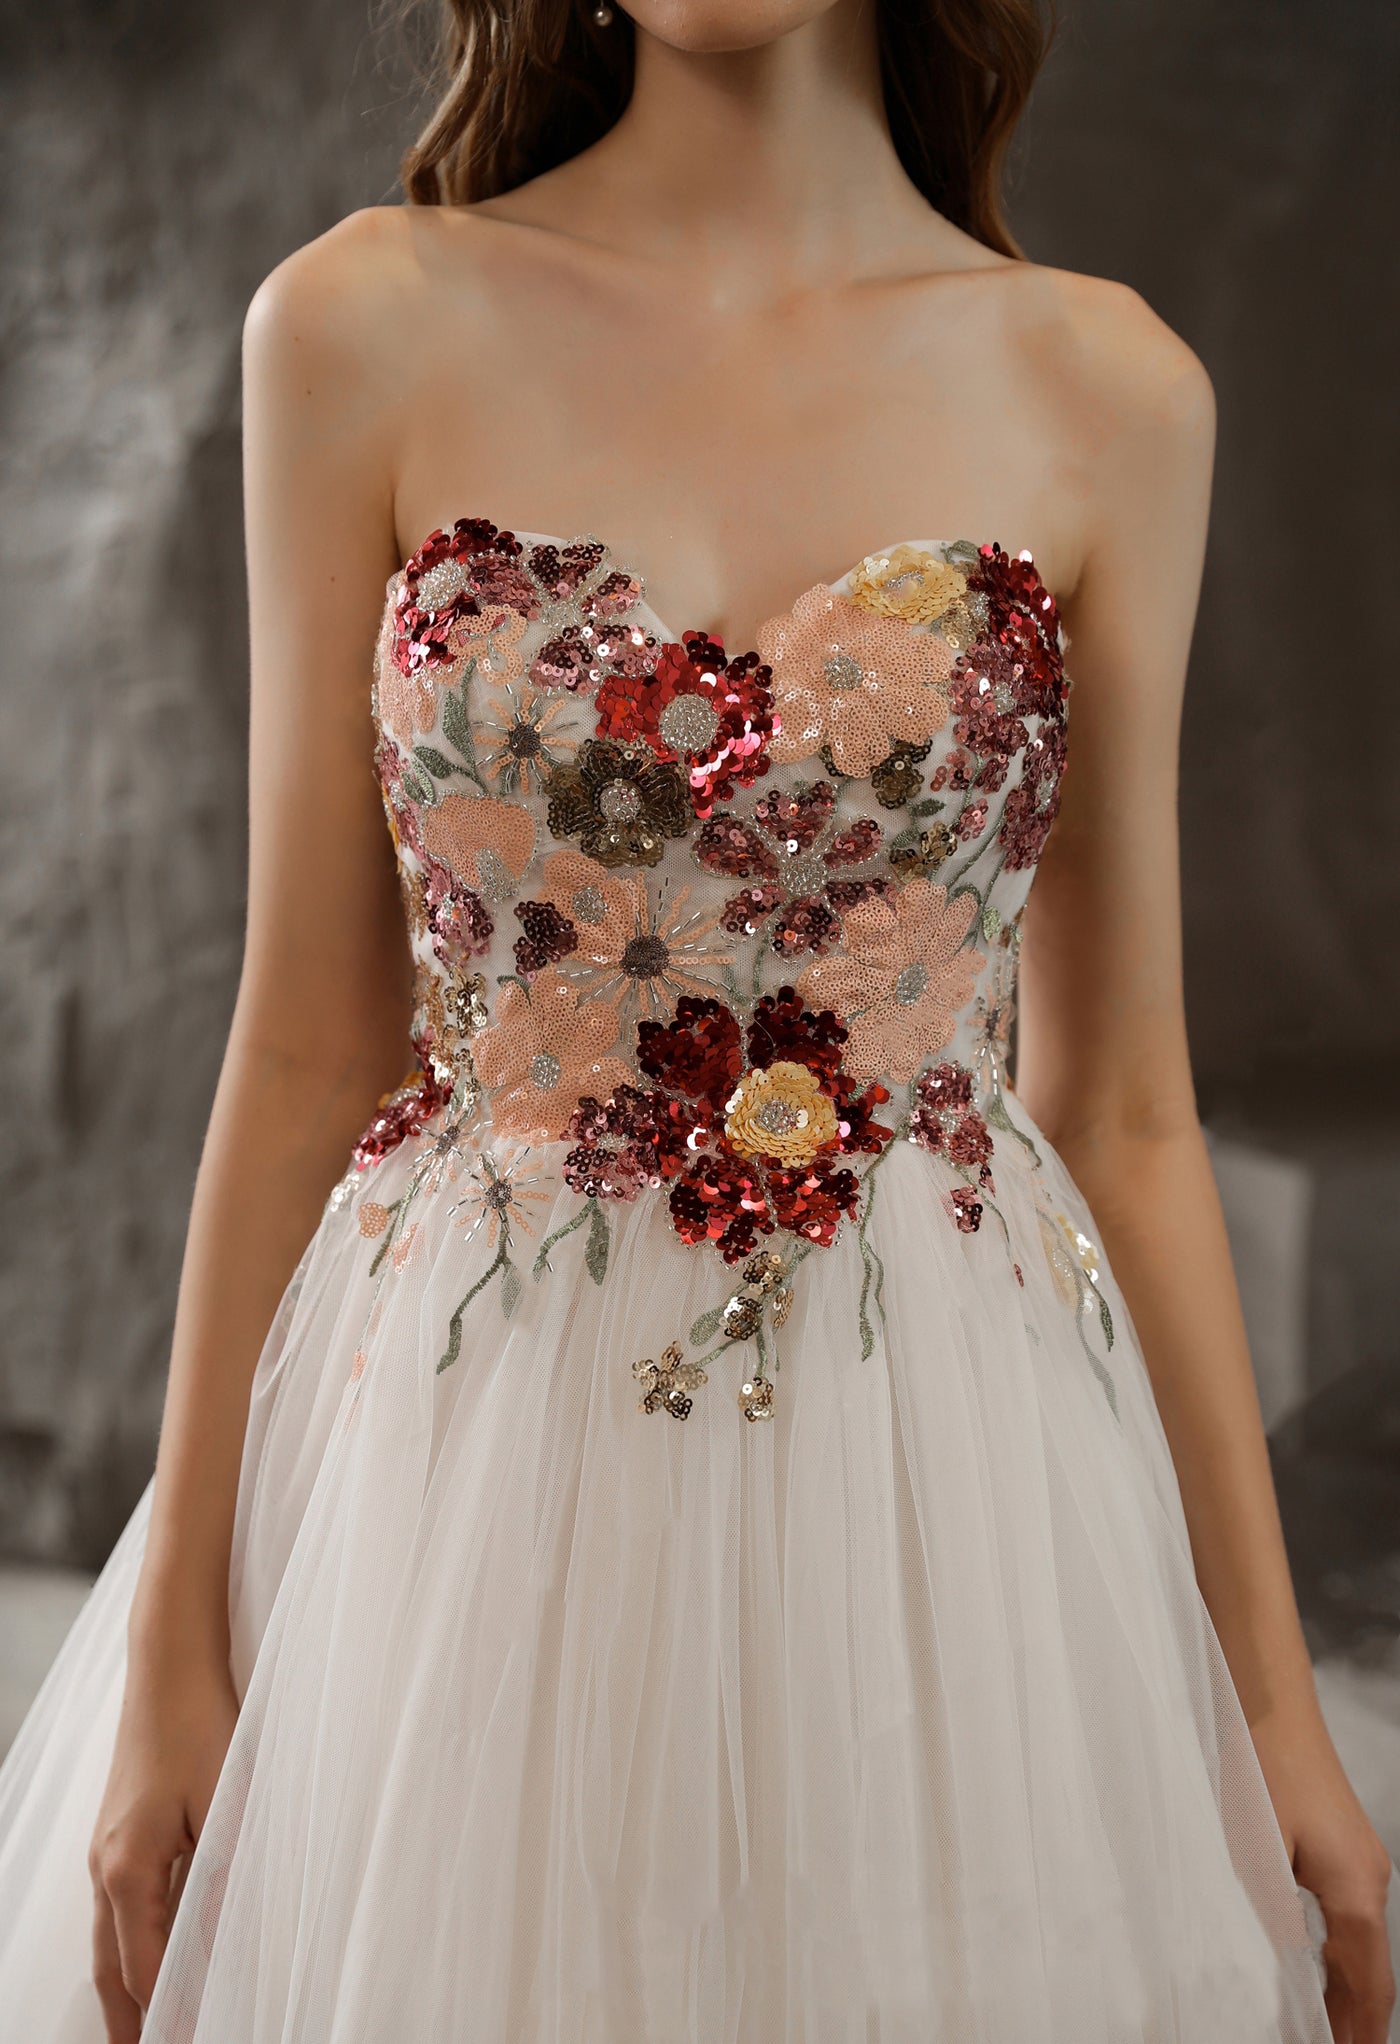 A woman in a wedding dress with flowers on it, shopping for her perfect Bergamot Bridal Strapless Princess A-line Bridal Gown with Tulle Skirt and Floral Beaded Bodice at a bridal shop in London.